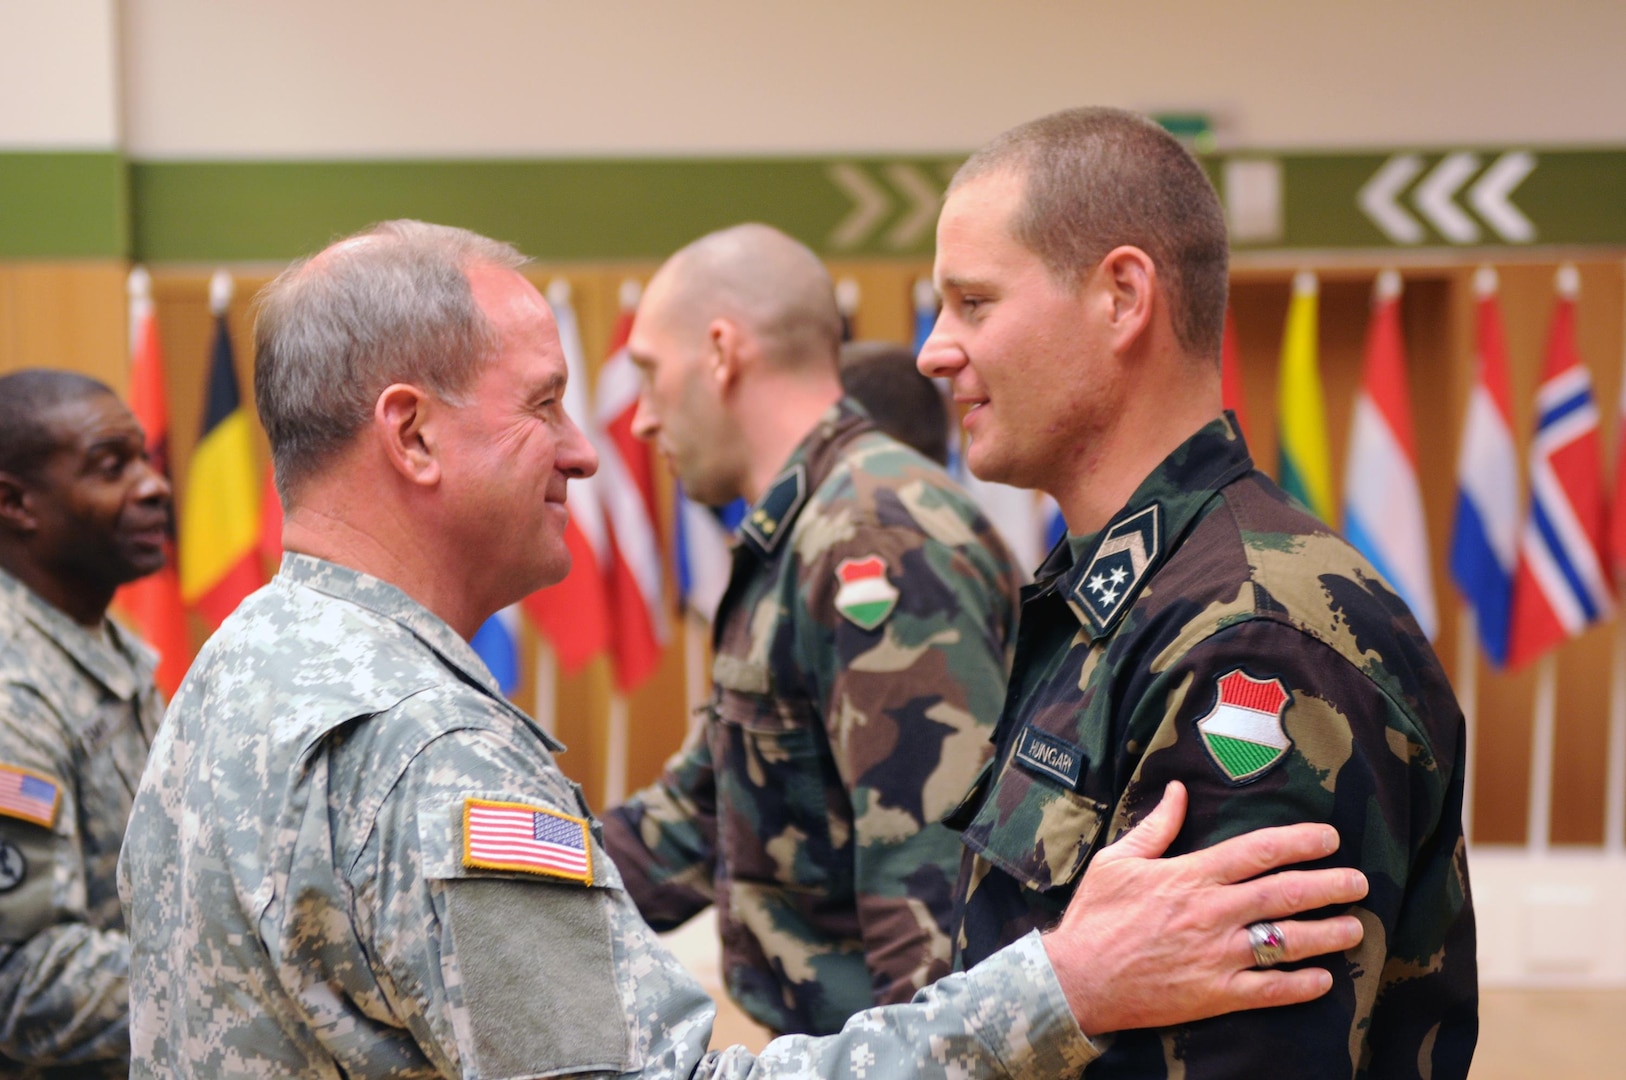 Army. Maj. Gen. Gregory Wayt, the adjutant general of the Ohio National Guard, awards the Ohio Commendation Medal to Hungarian Defense Forces soldiers who served in a joint unit with Ohio National Guard members in Afghanistan at Tata, Hungary, on Sept. 15, 2010. A delegation of Ohio National Guard leaders was in Hungary for National Guard State Partnership Program activities.